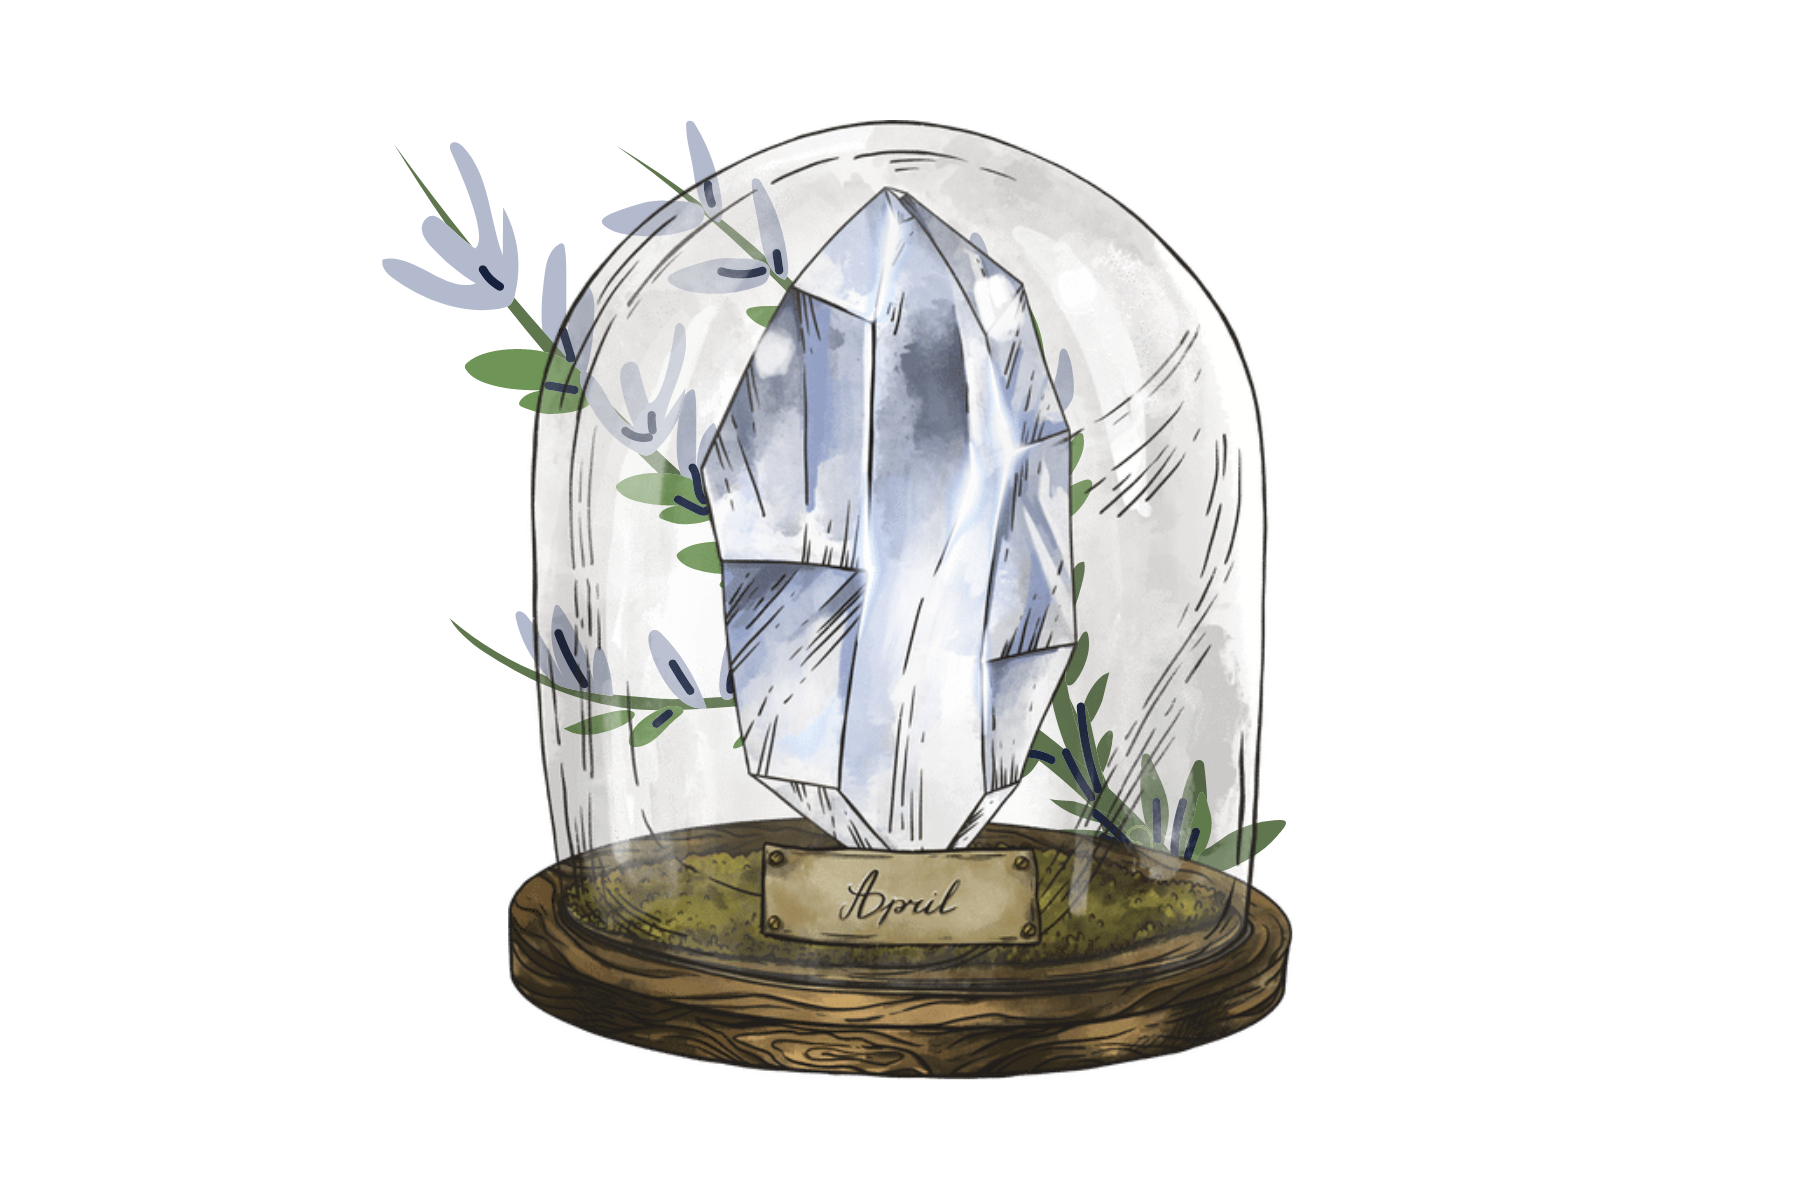 Diamond in a glass jar with leaves on the outside